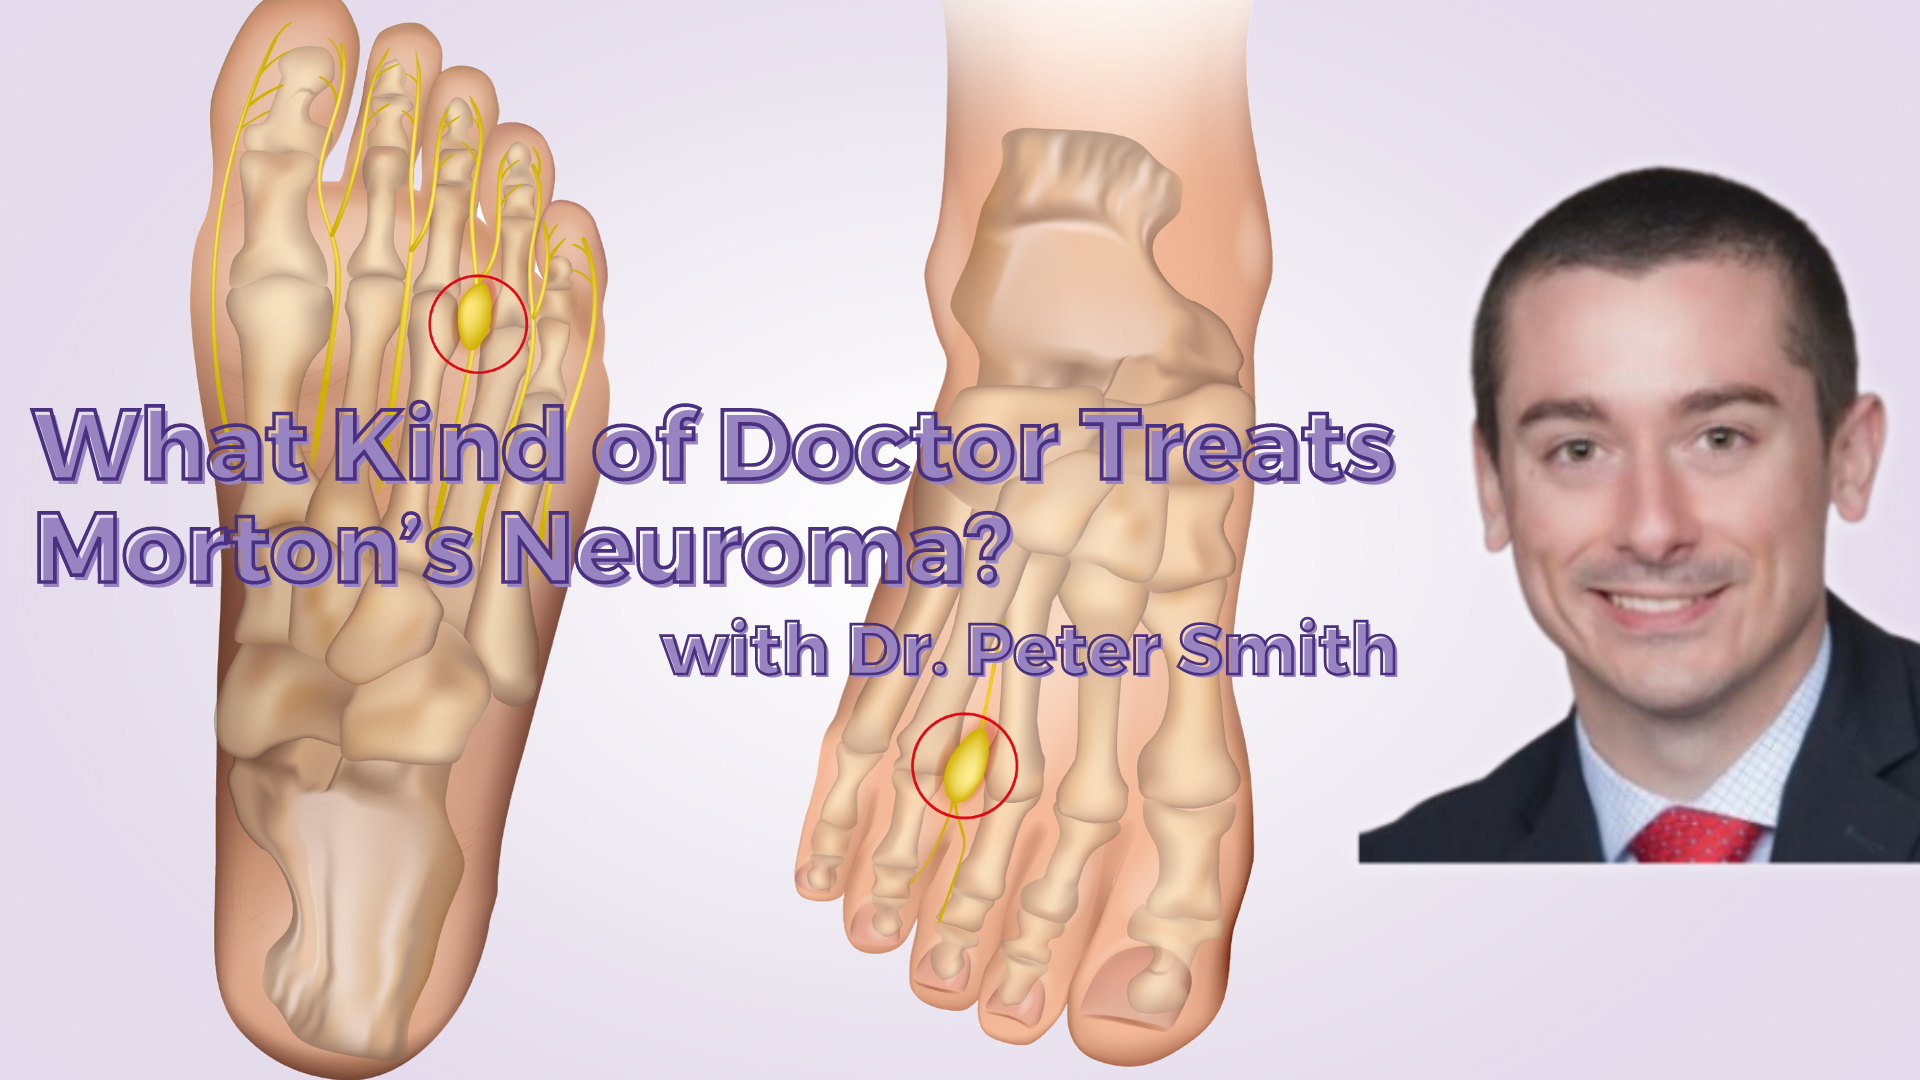 What Kind of Doctor Treats Morton's Neuroma?